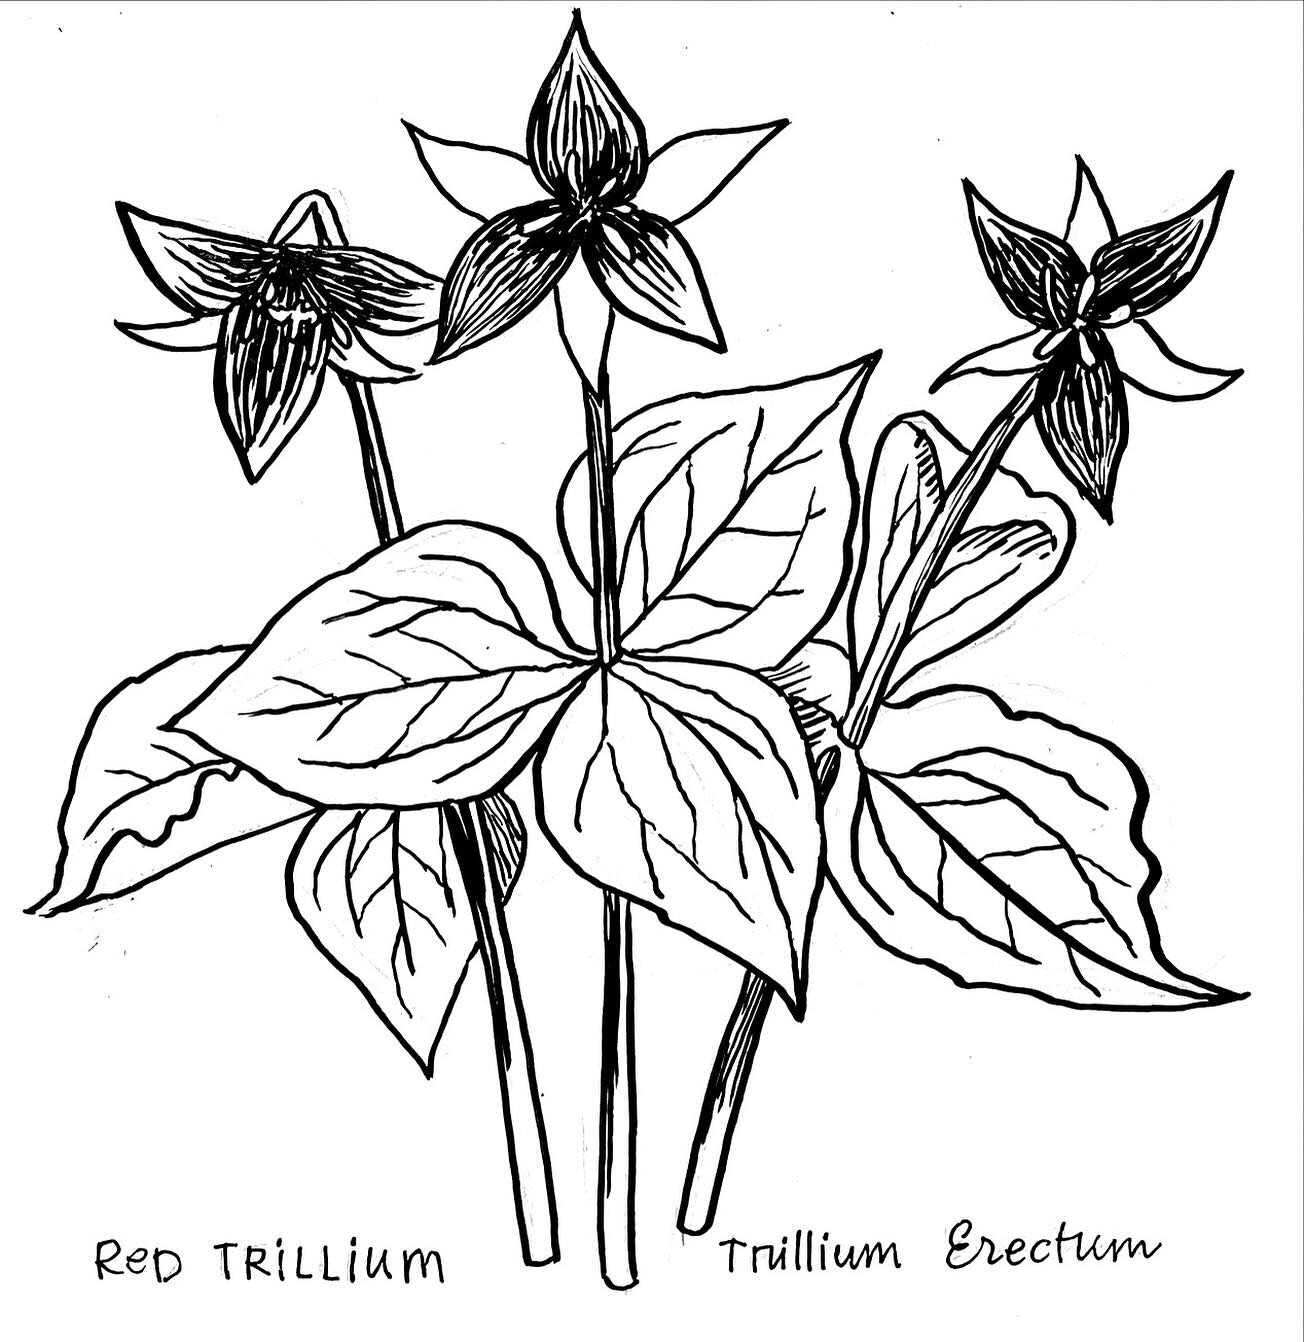 Day 3, Red Trillium. 2nd of the spring ephemerals. Everything about these comes in 3s, so of course I had to draw a group of 3 too.

Did you know that these are also called Stinking Benjamins and Wet Dog Wakerobins? Apparently they smell bad. I have 